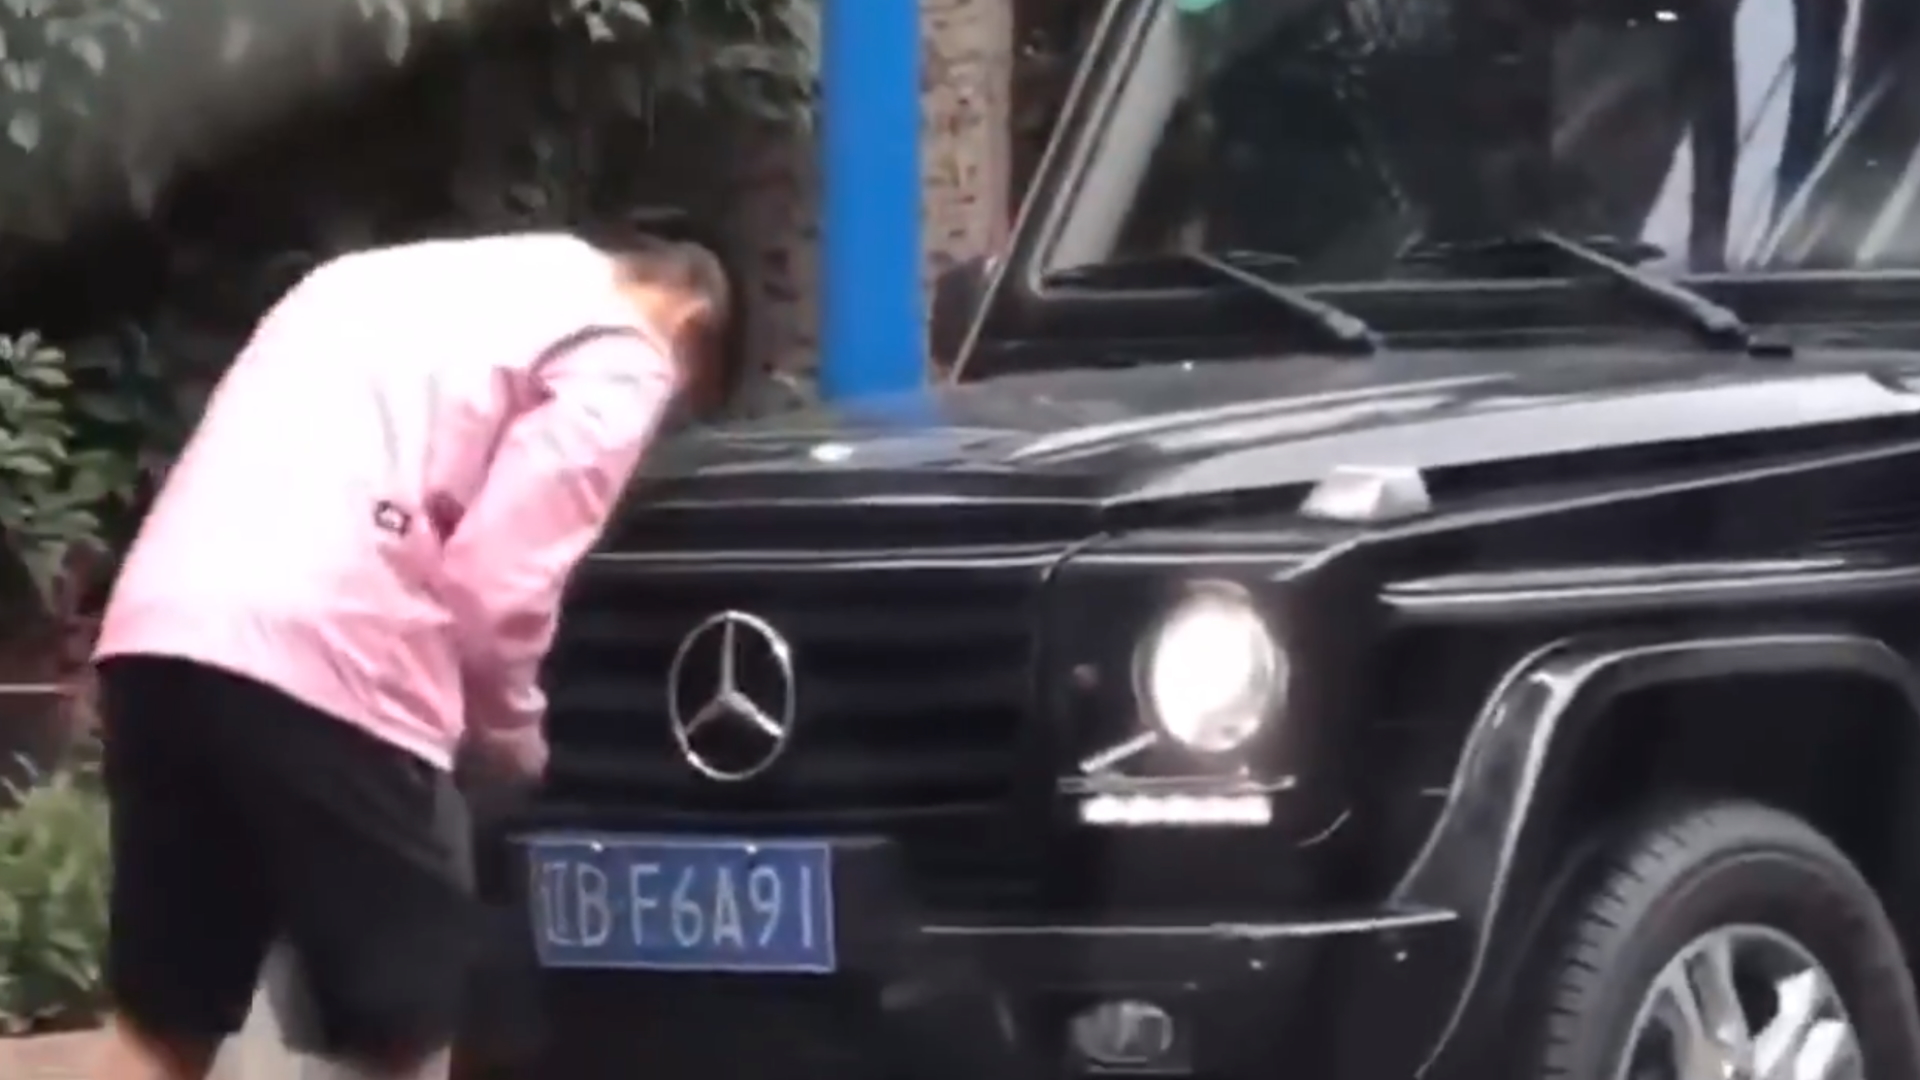 Bizarre: Guangzhou fires Chinese star player after changing letter on license plate - Bóng Đá